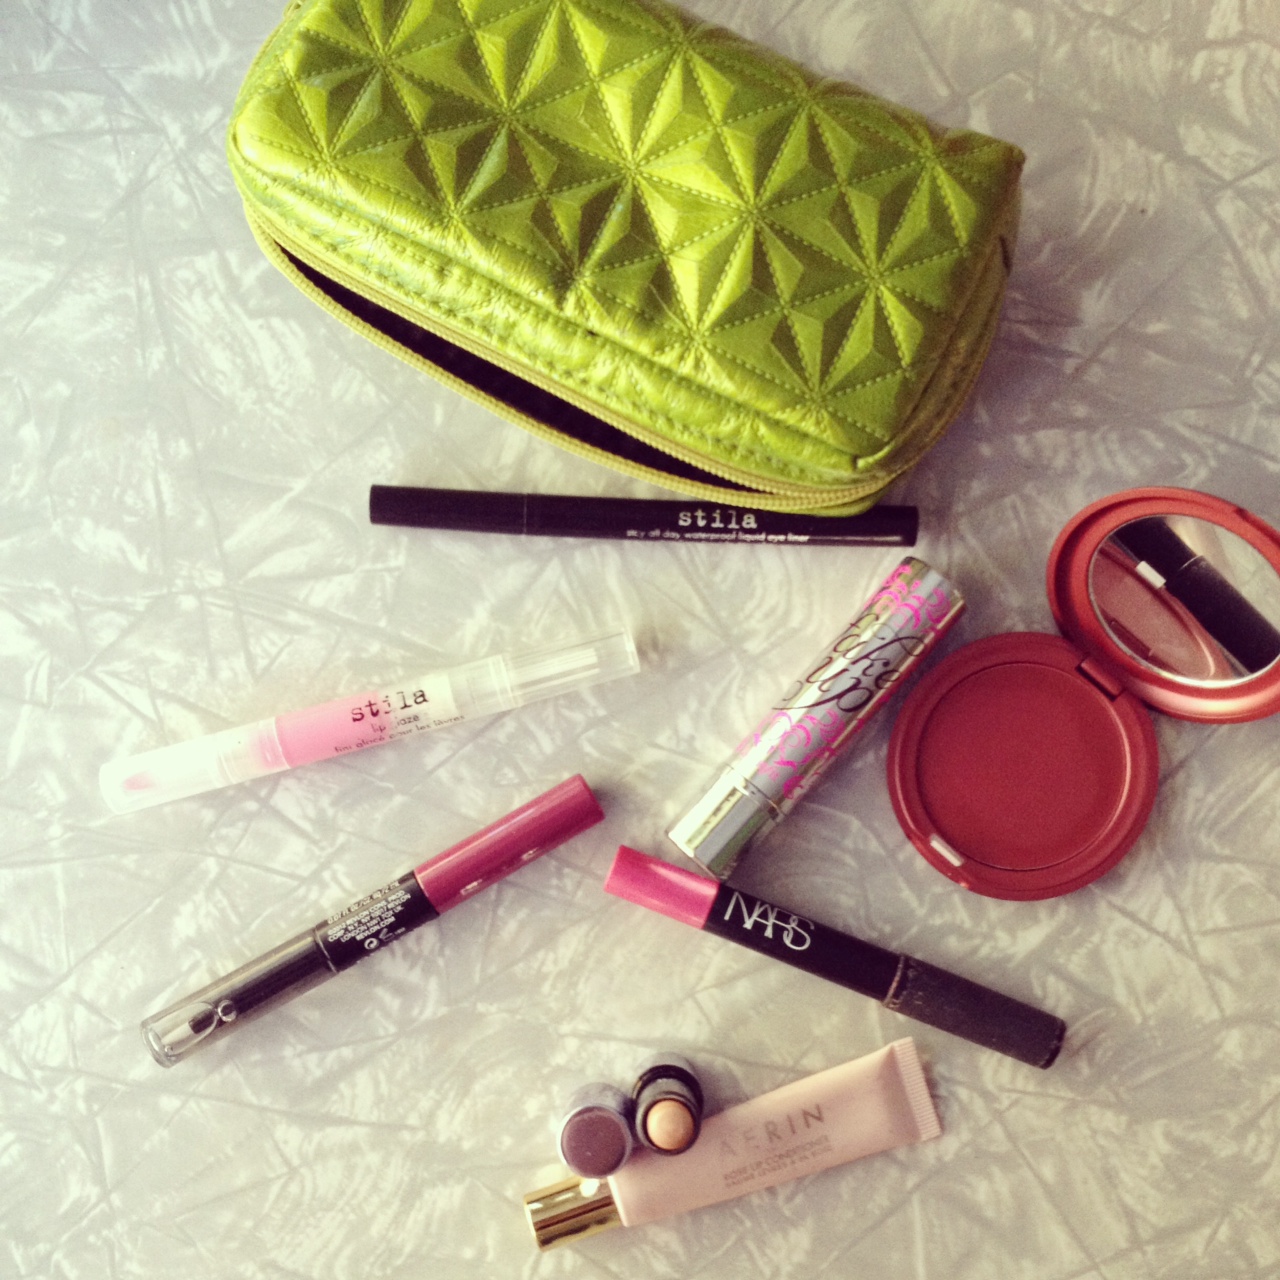 On the go makeup essentials